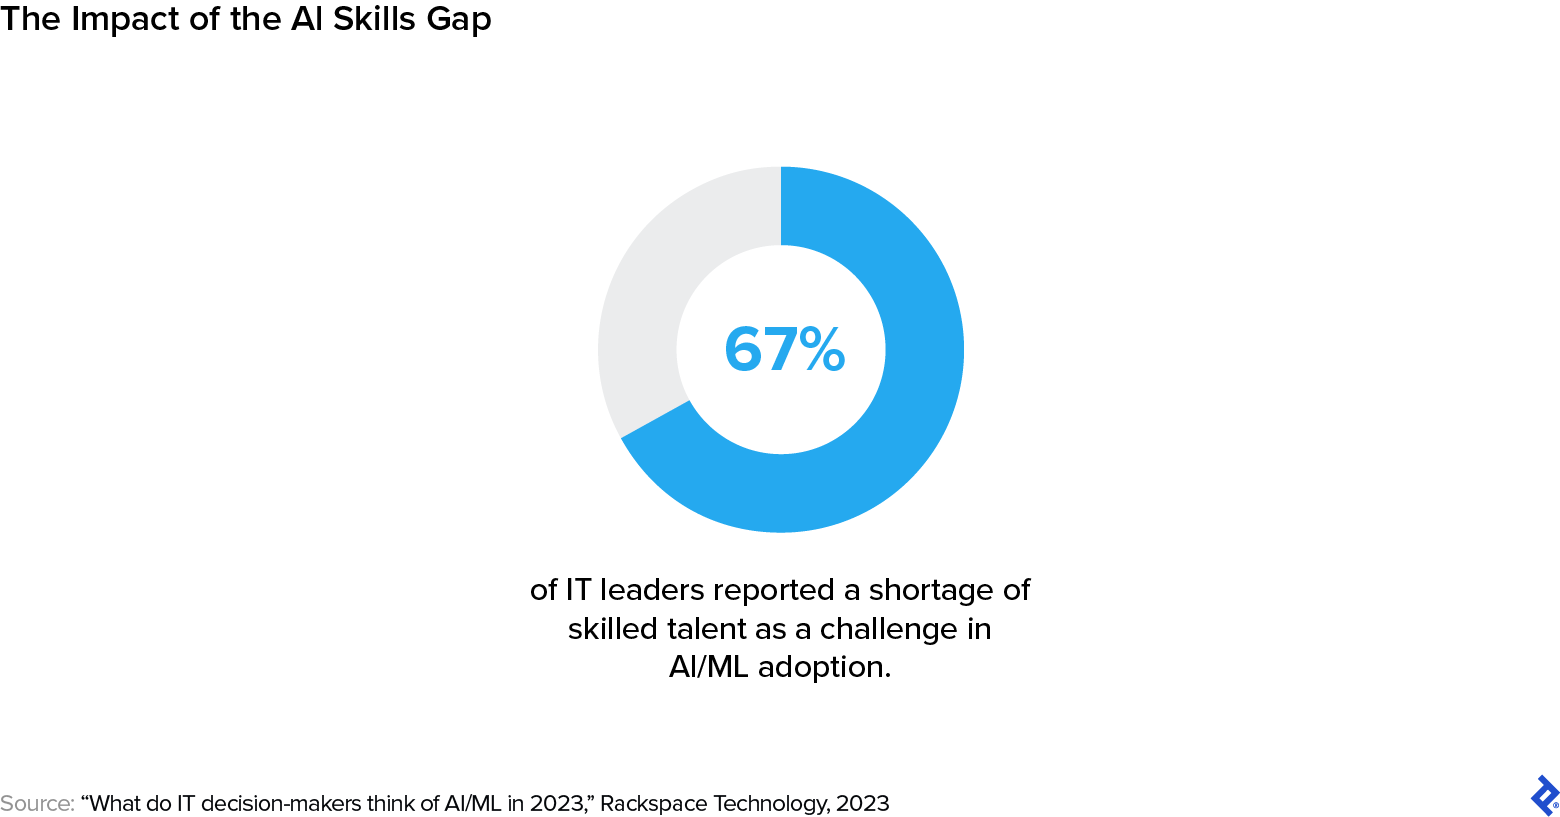 Lack of skilled talent is a key challenge for many organizations, and is even causing many companies to slow down their AI initiatives.